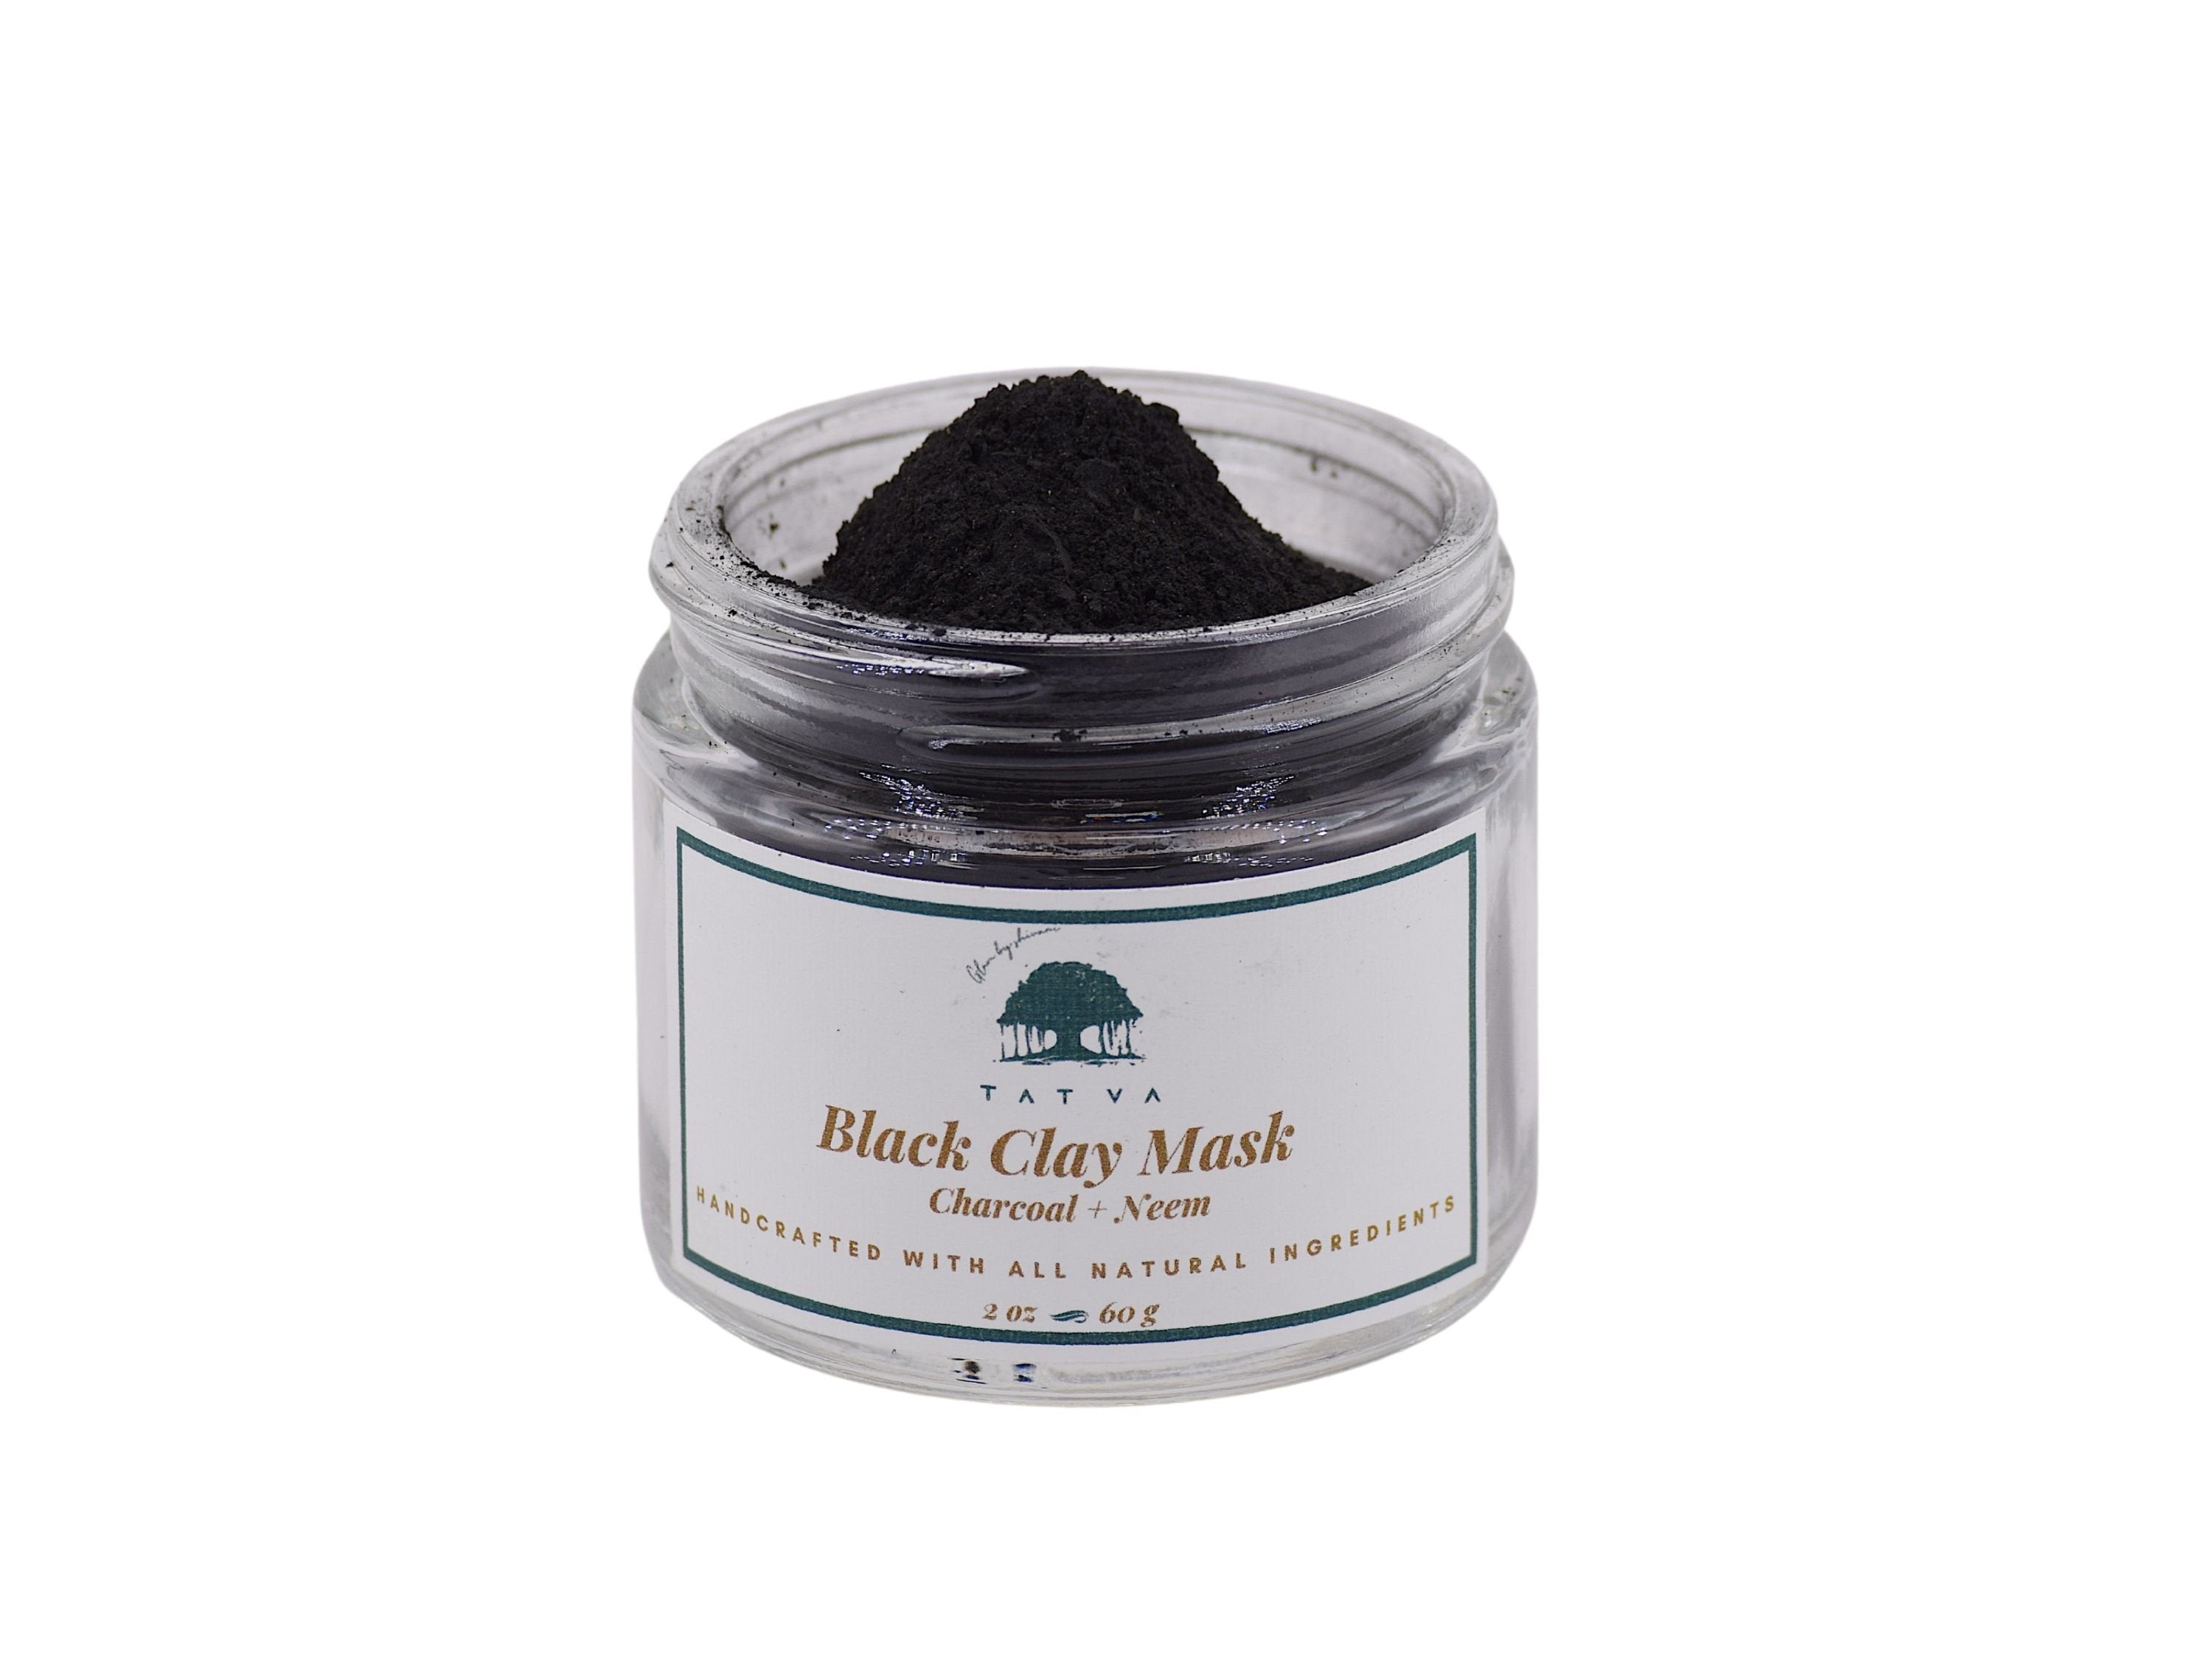 The Black Clay Mask -  anti bacterial for acne prone skin